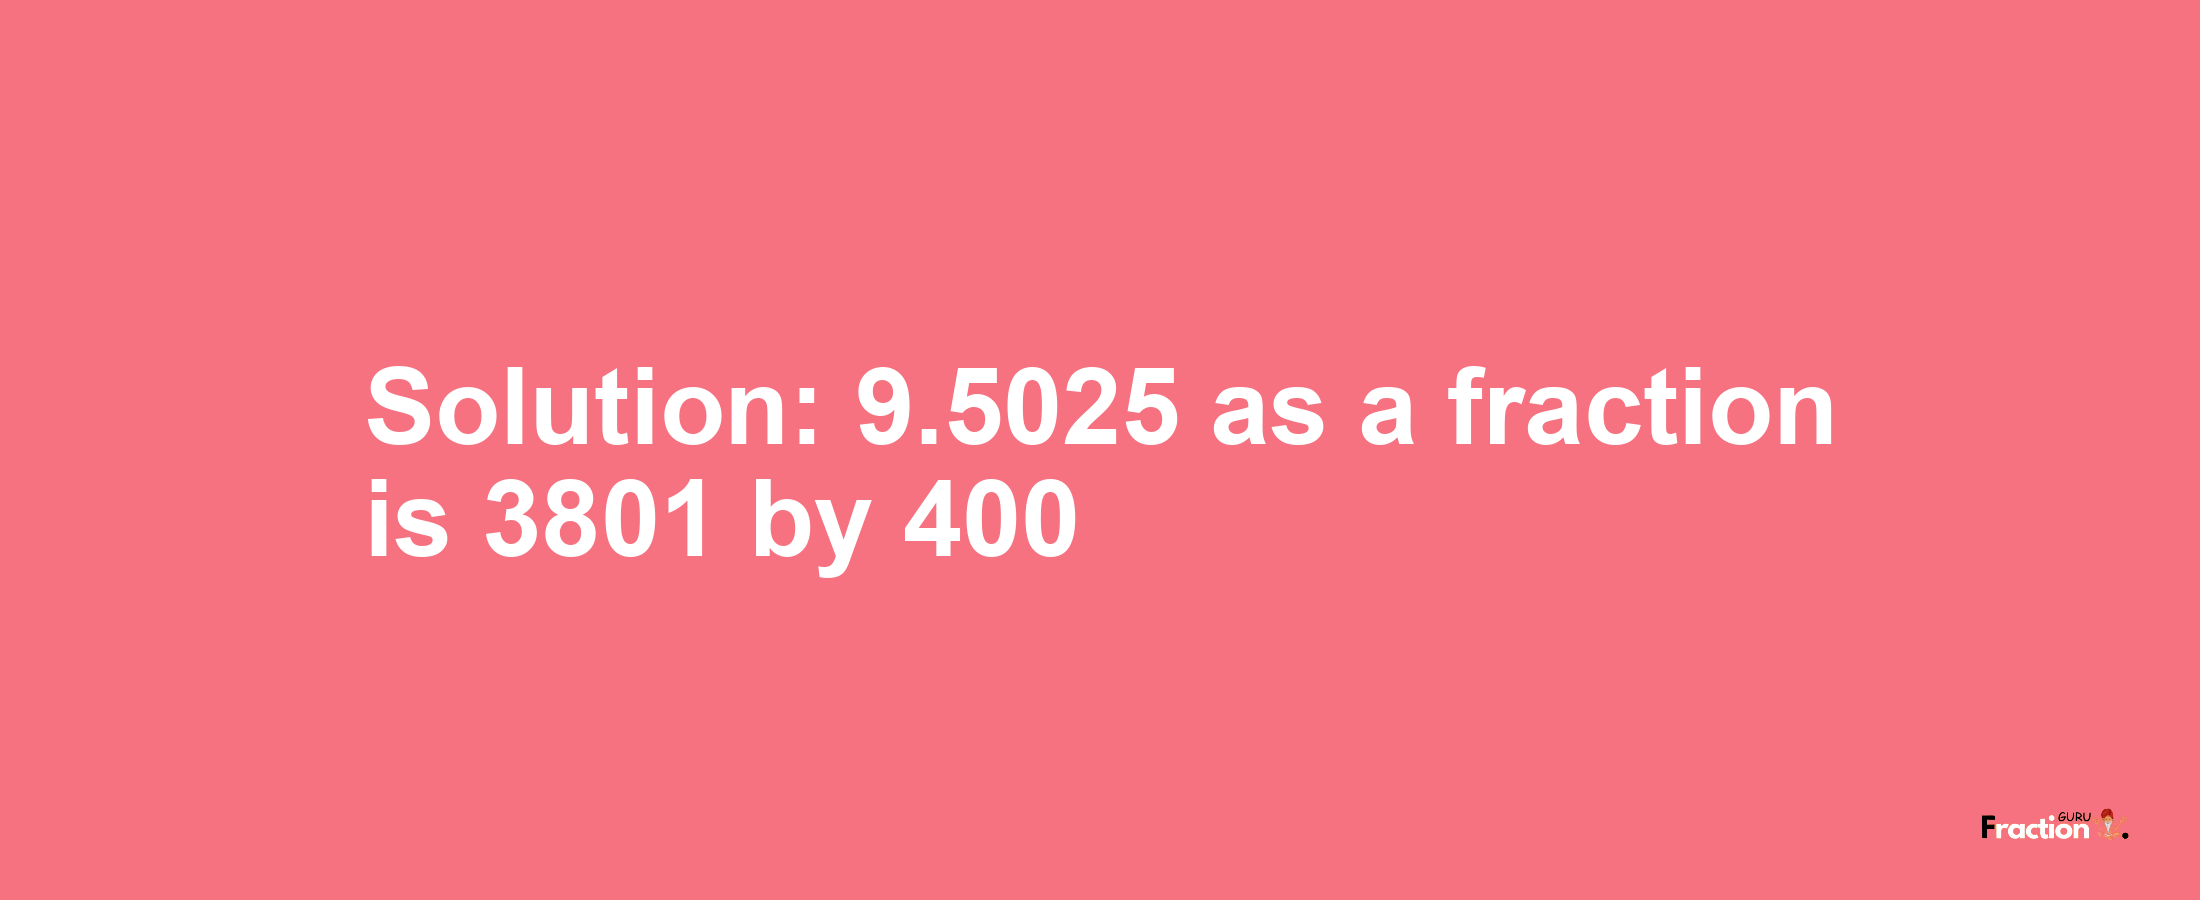 Solution:9.5025 as a fraction is 3801/400